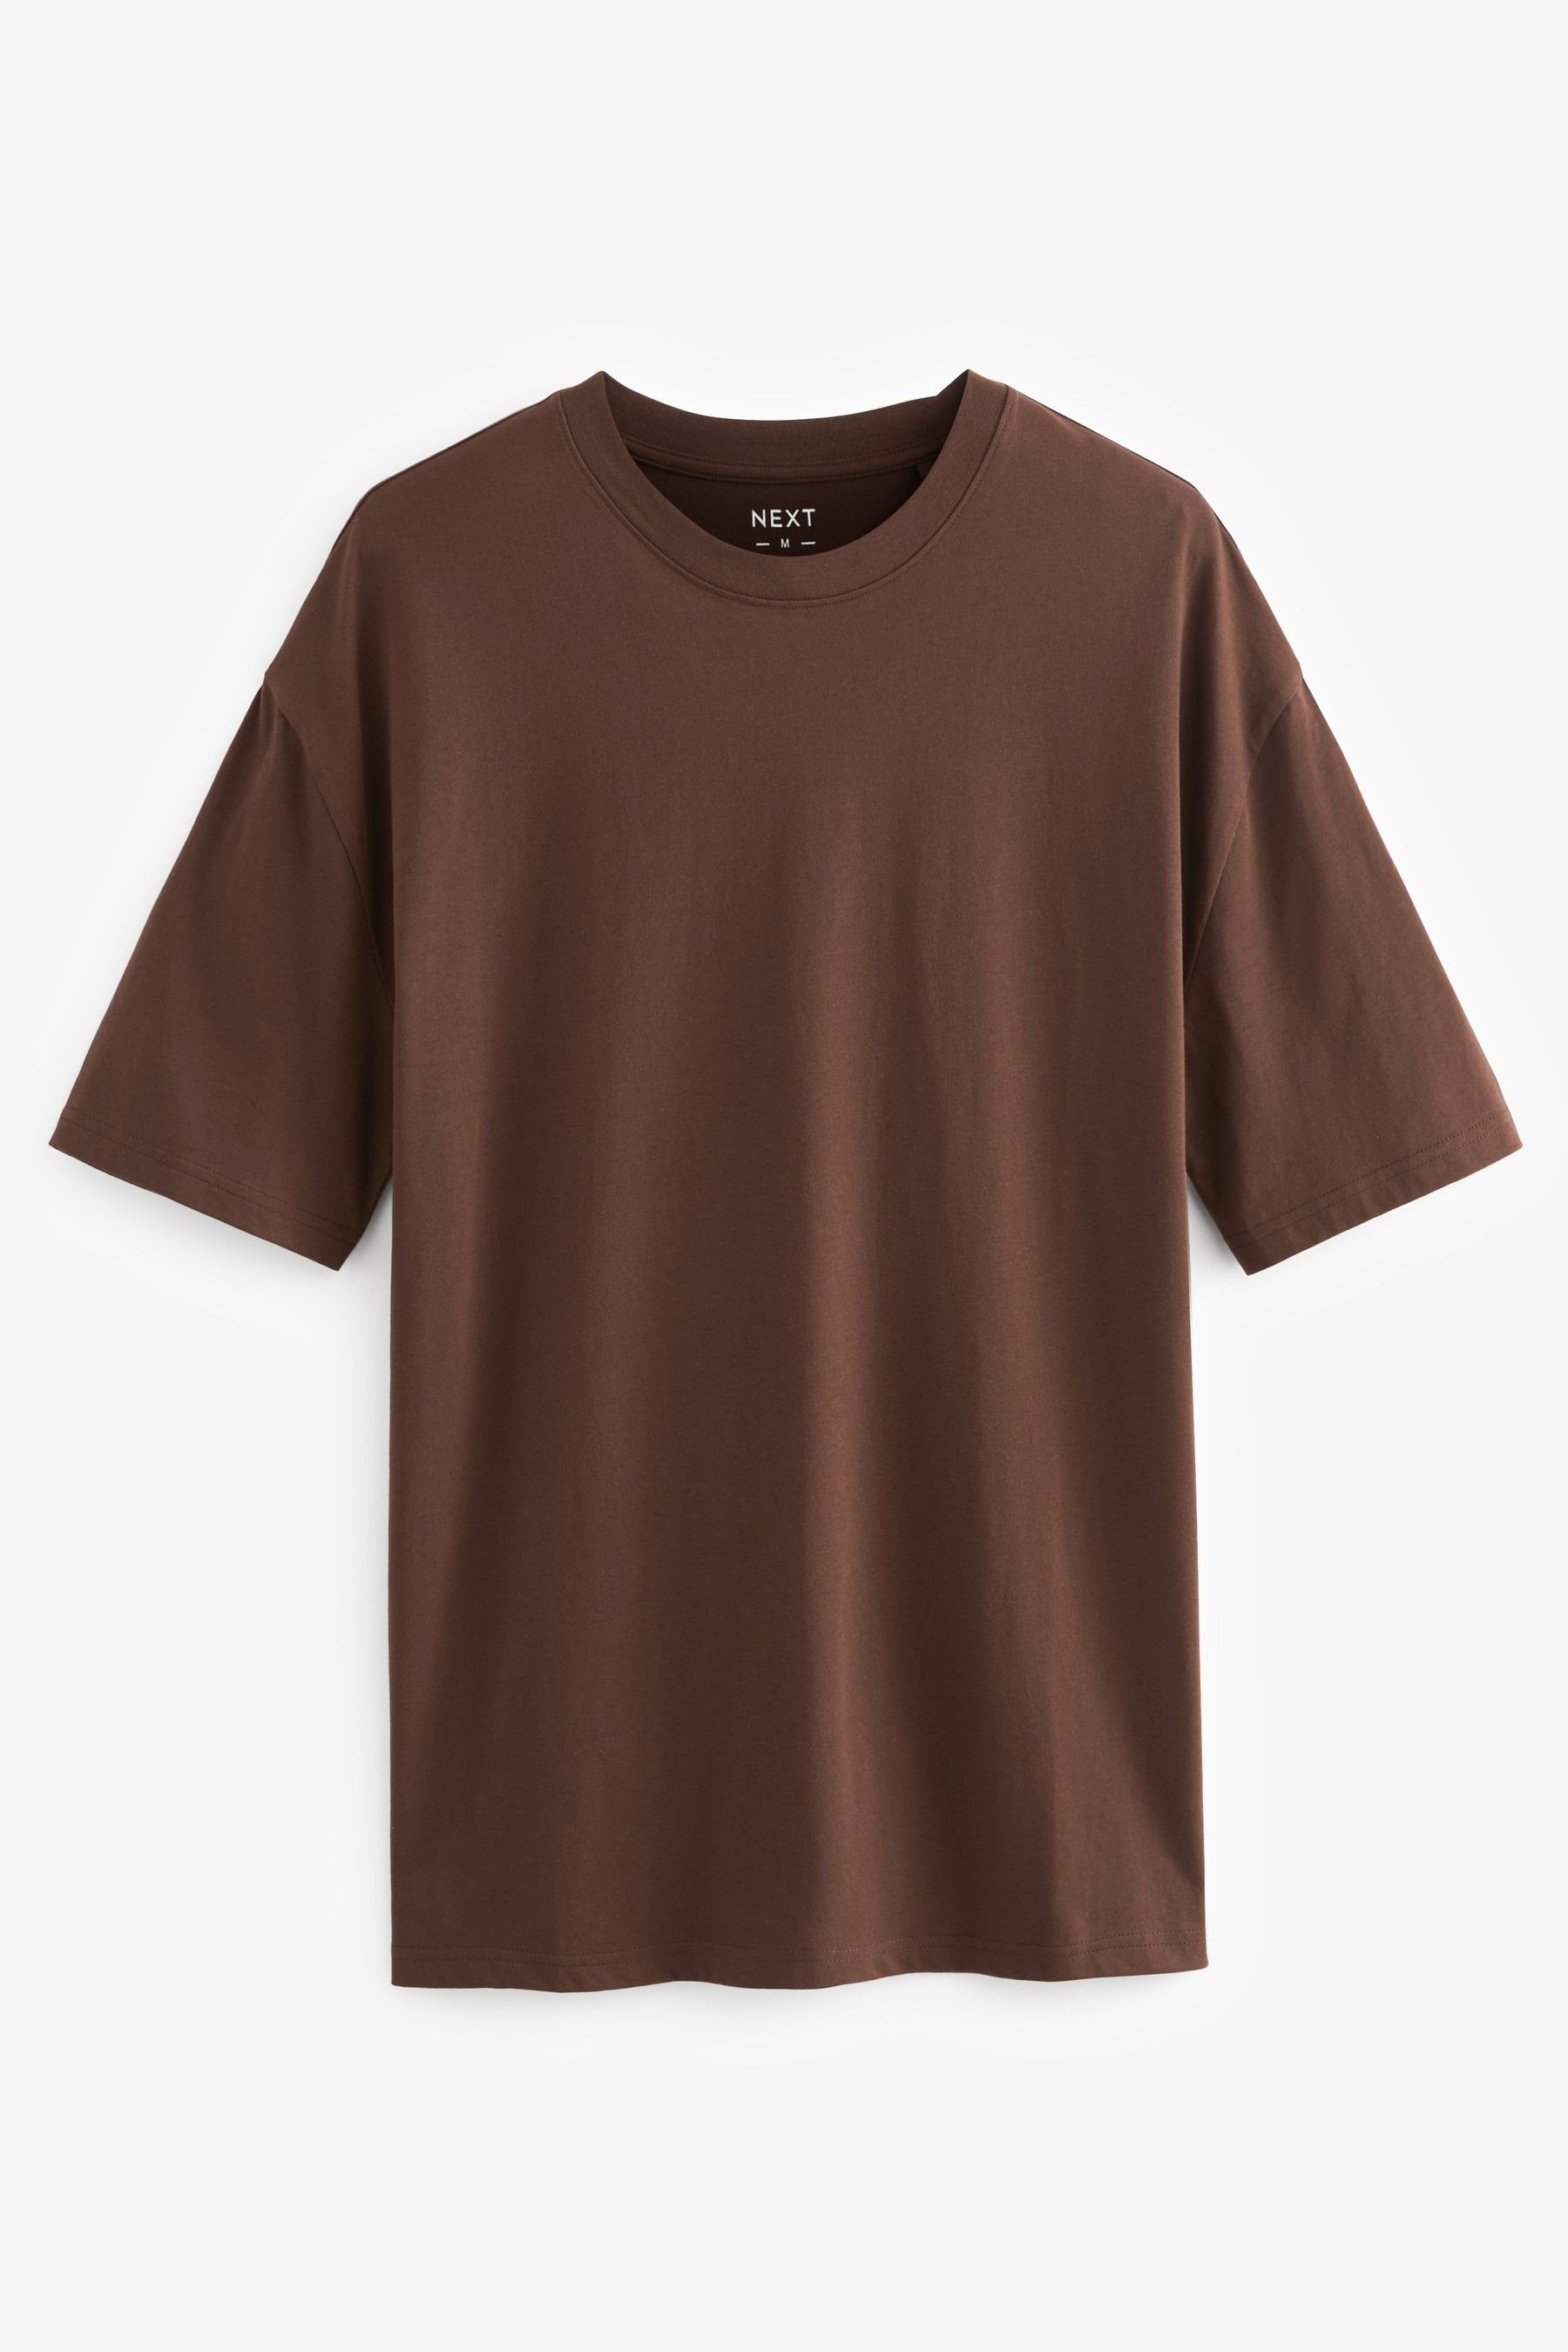 Next T-Shirt im Chocolate Rundhals-T-Shirt Brown Relaxed Fit (1-tlg)